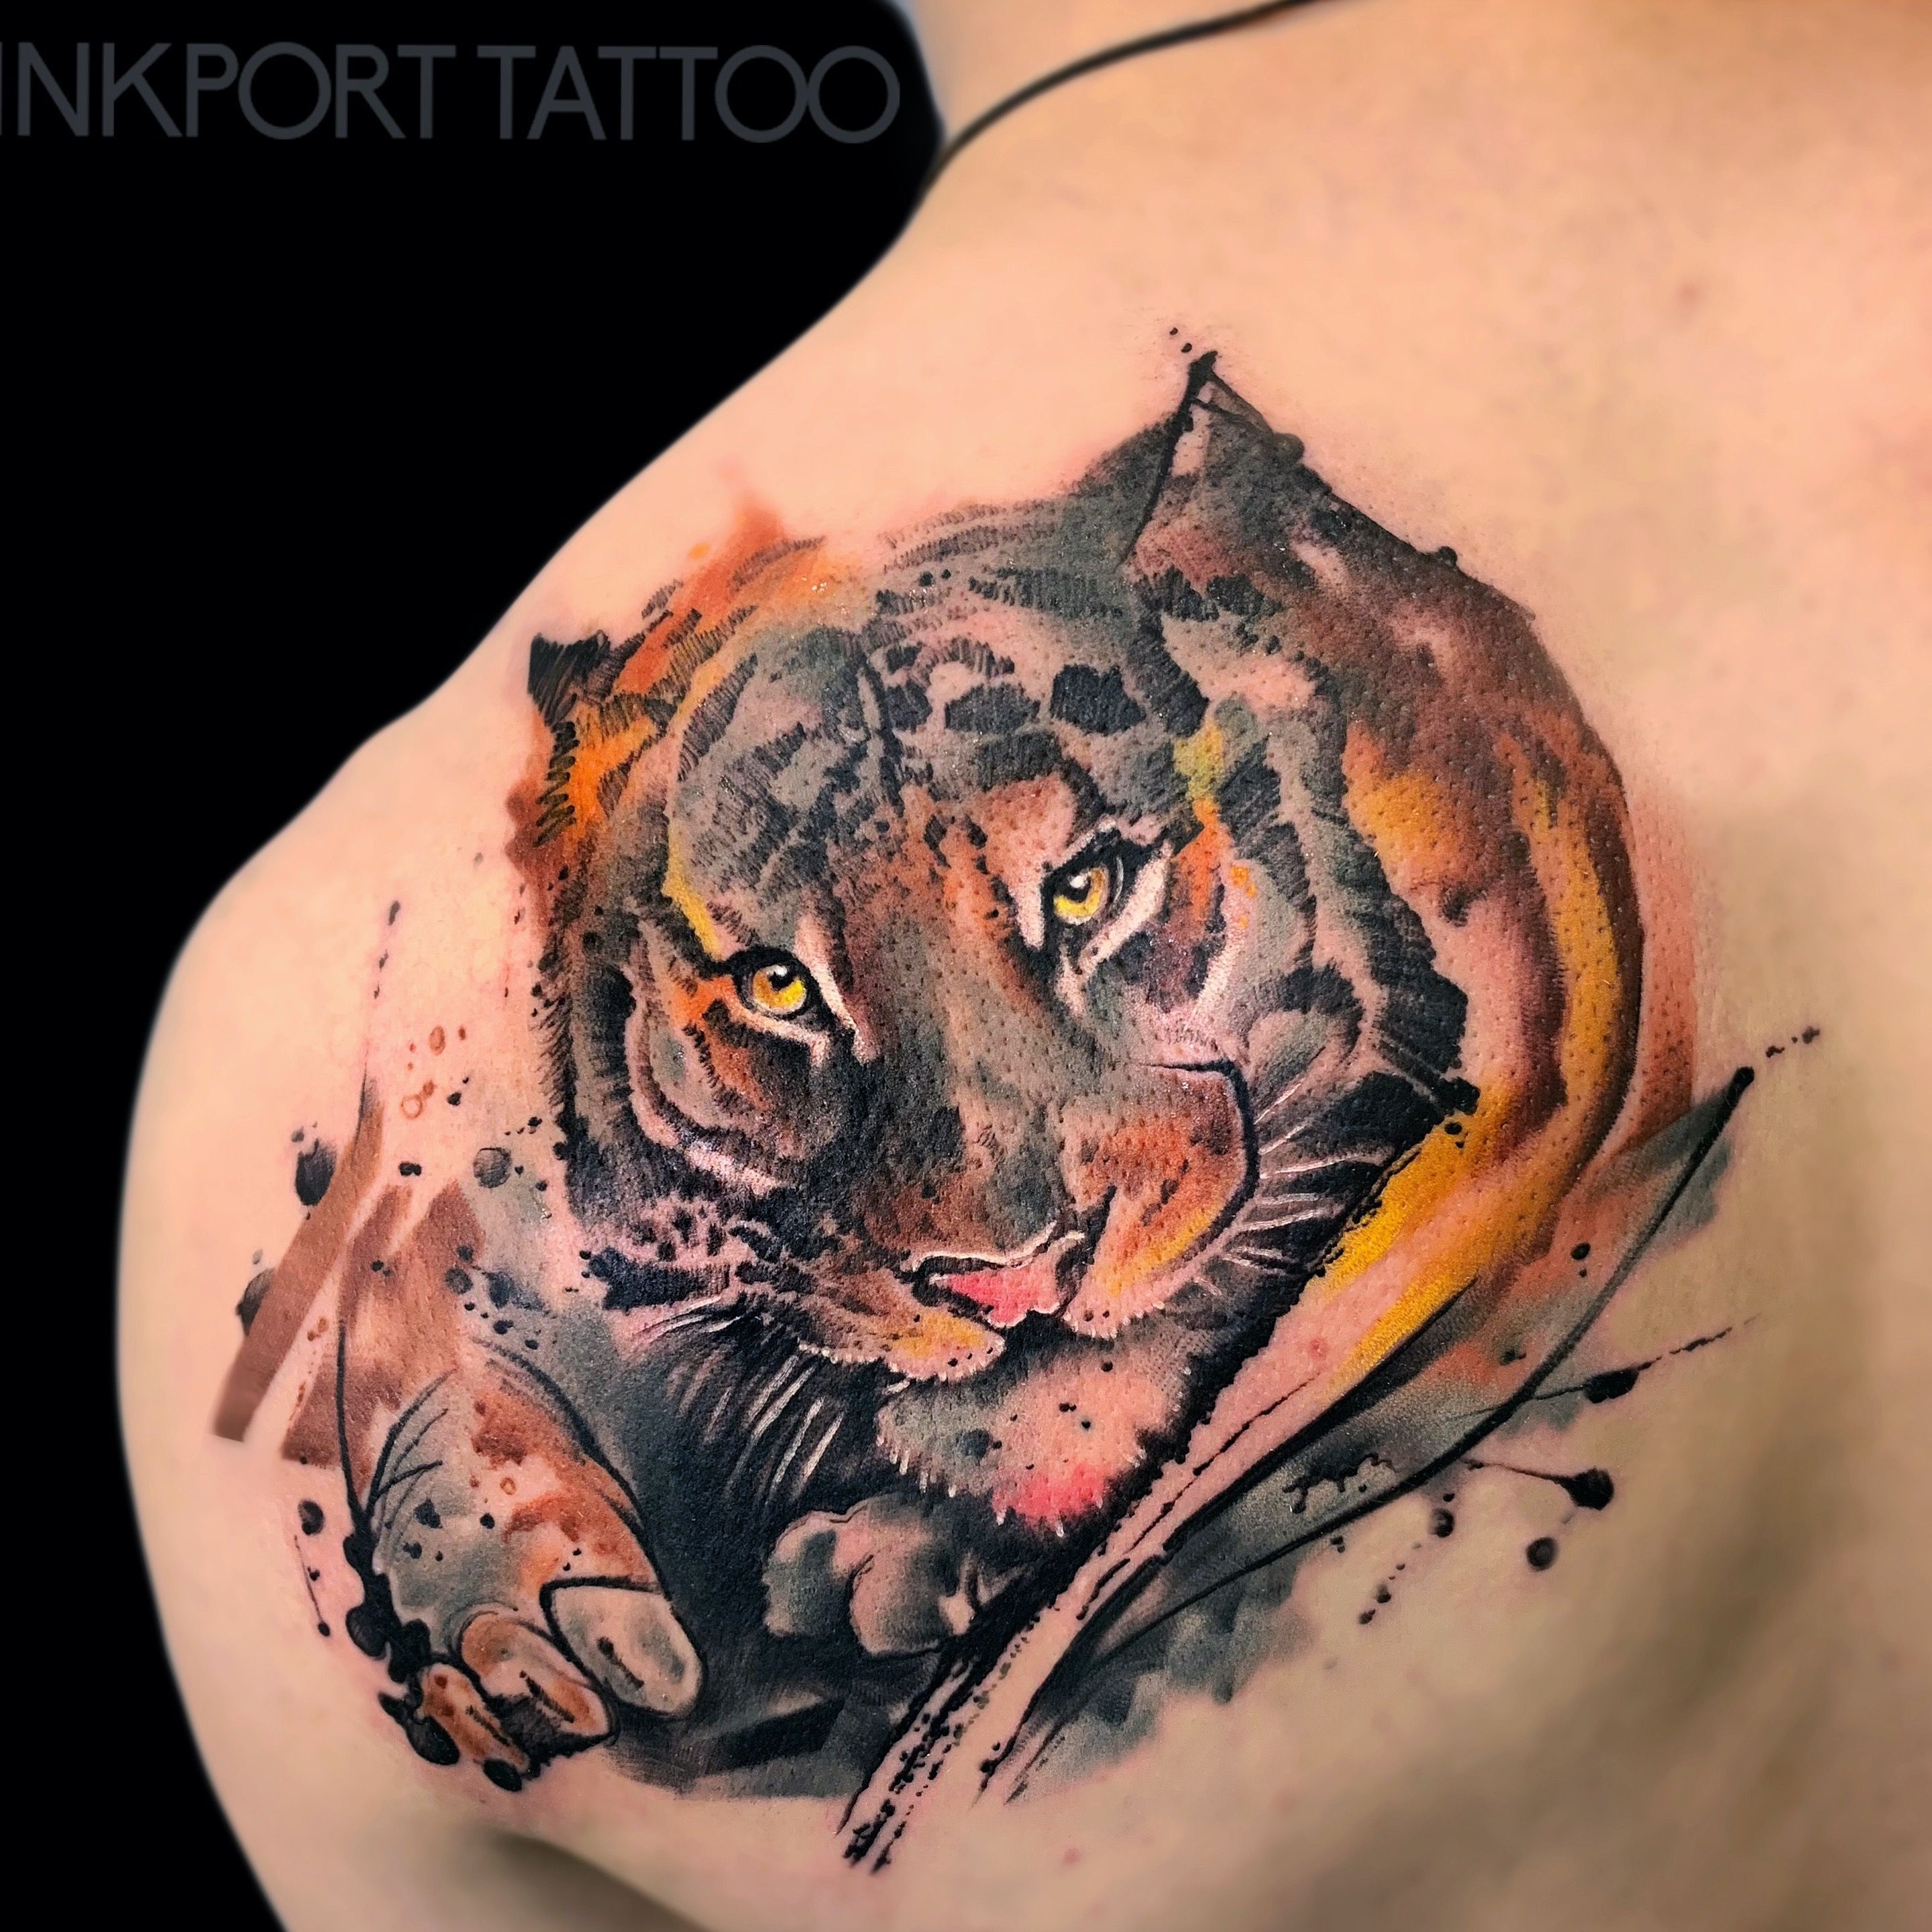 Tattoo uploaded by John D'Addario | inkporttattoo • Tiger tattoo by John  D'Addario #JohnDAddario #spacetattoo #abstracttattoo #inkporttattoo  #cosmostattoo #Москва #usa #moscowtattoo #abstracttattoo  #blackandwhitetattoo #москватату #акварельтату #moscow ...